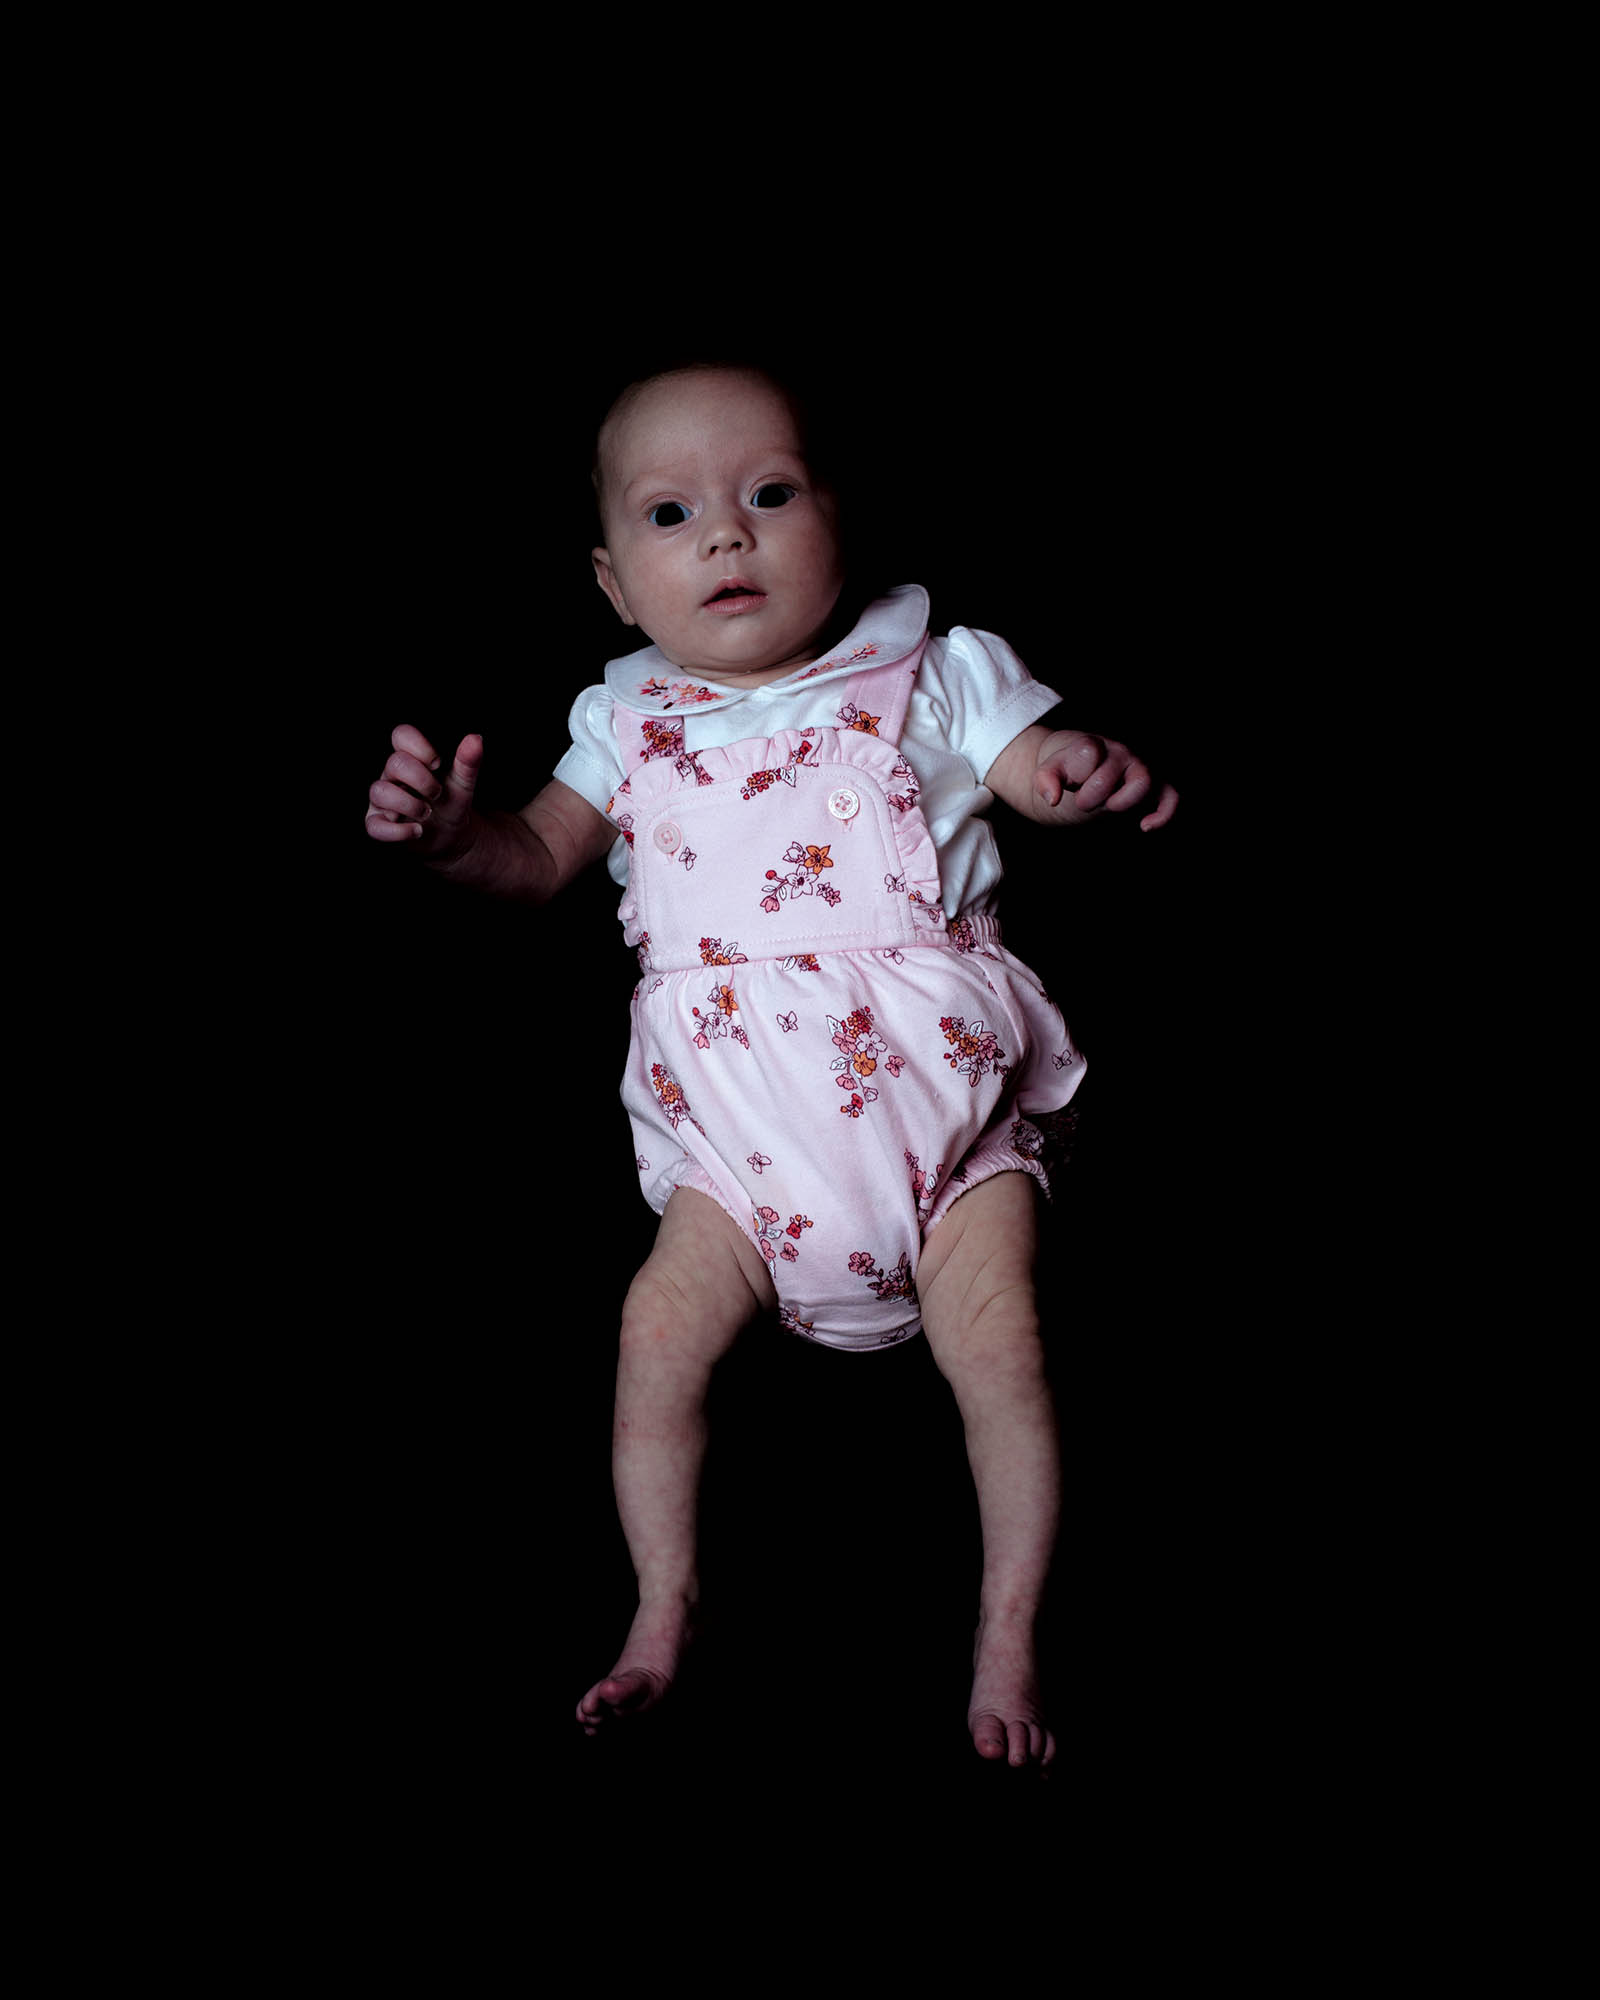 a baby is a pink outfit lying on its a back against a black backdrop